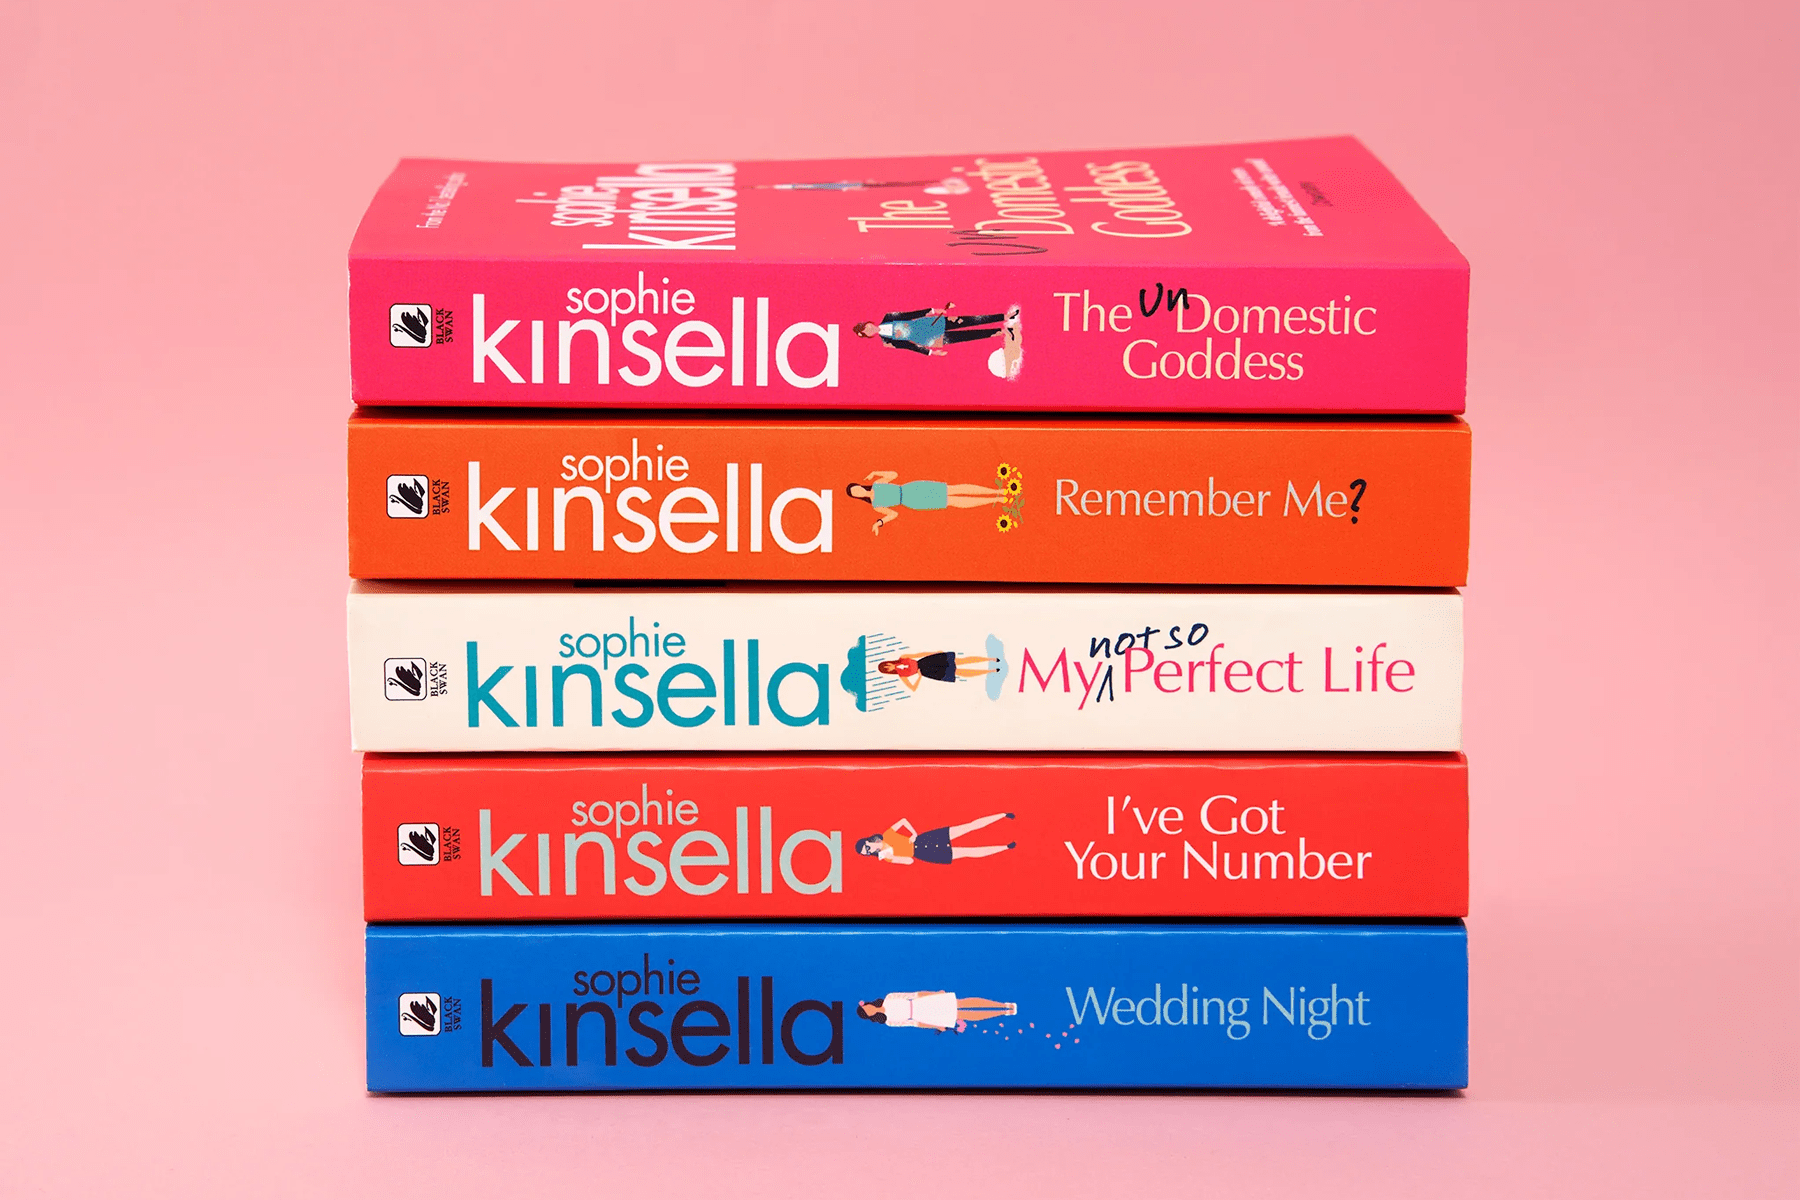 Photo of the Sophie Kinsella bundle, featuring The Undomestic Goddess, Remember Me?, My Not So Perfect Life, I've Got Your Number and Wedding Night